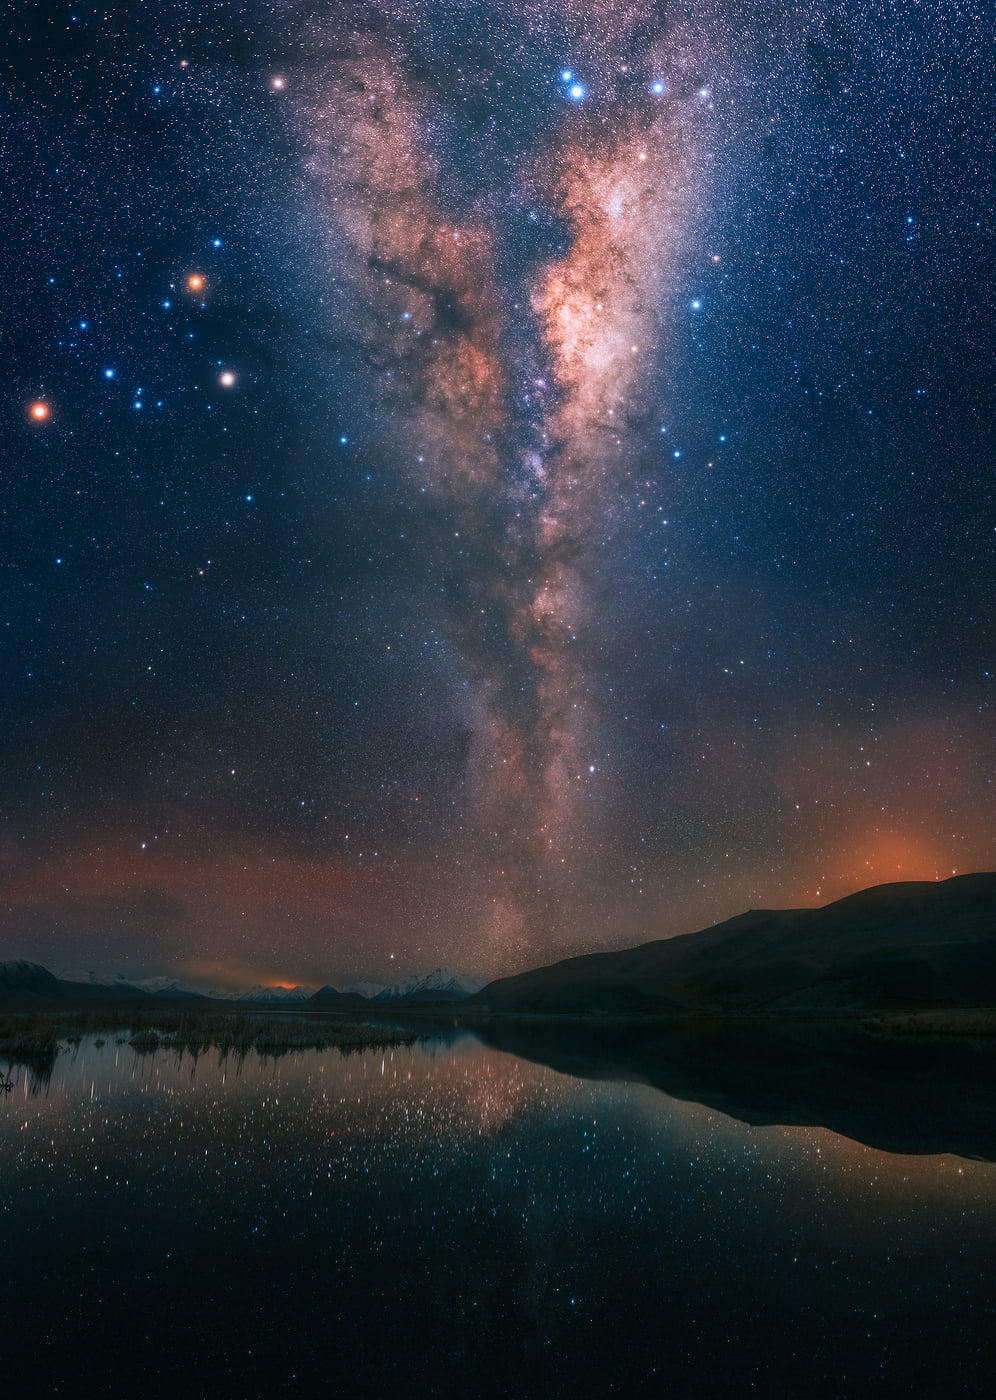 391 megapixels! A very high resolution, large-format VAST photo of the Milky Way, stars, and night sky over a lake, mountains, and grass; fine art landscape astrophotograph created by astrophotographer Paul Wilson in Maori Lakes, Canterbury, New Zealand